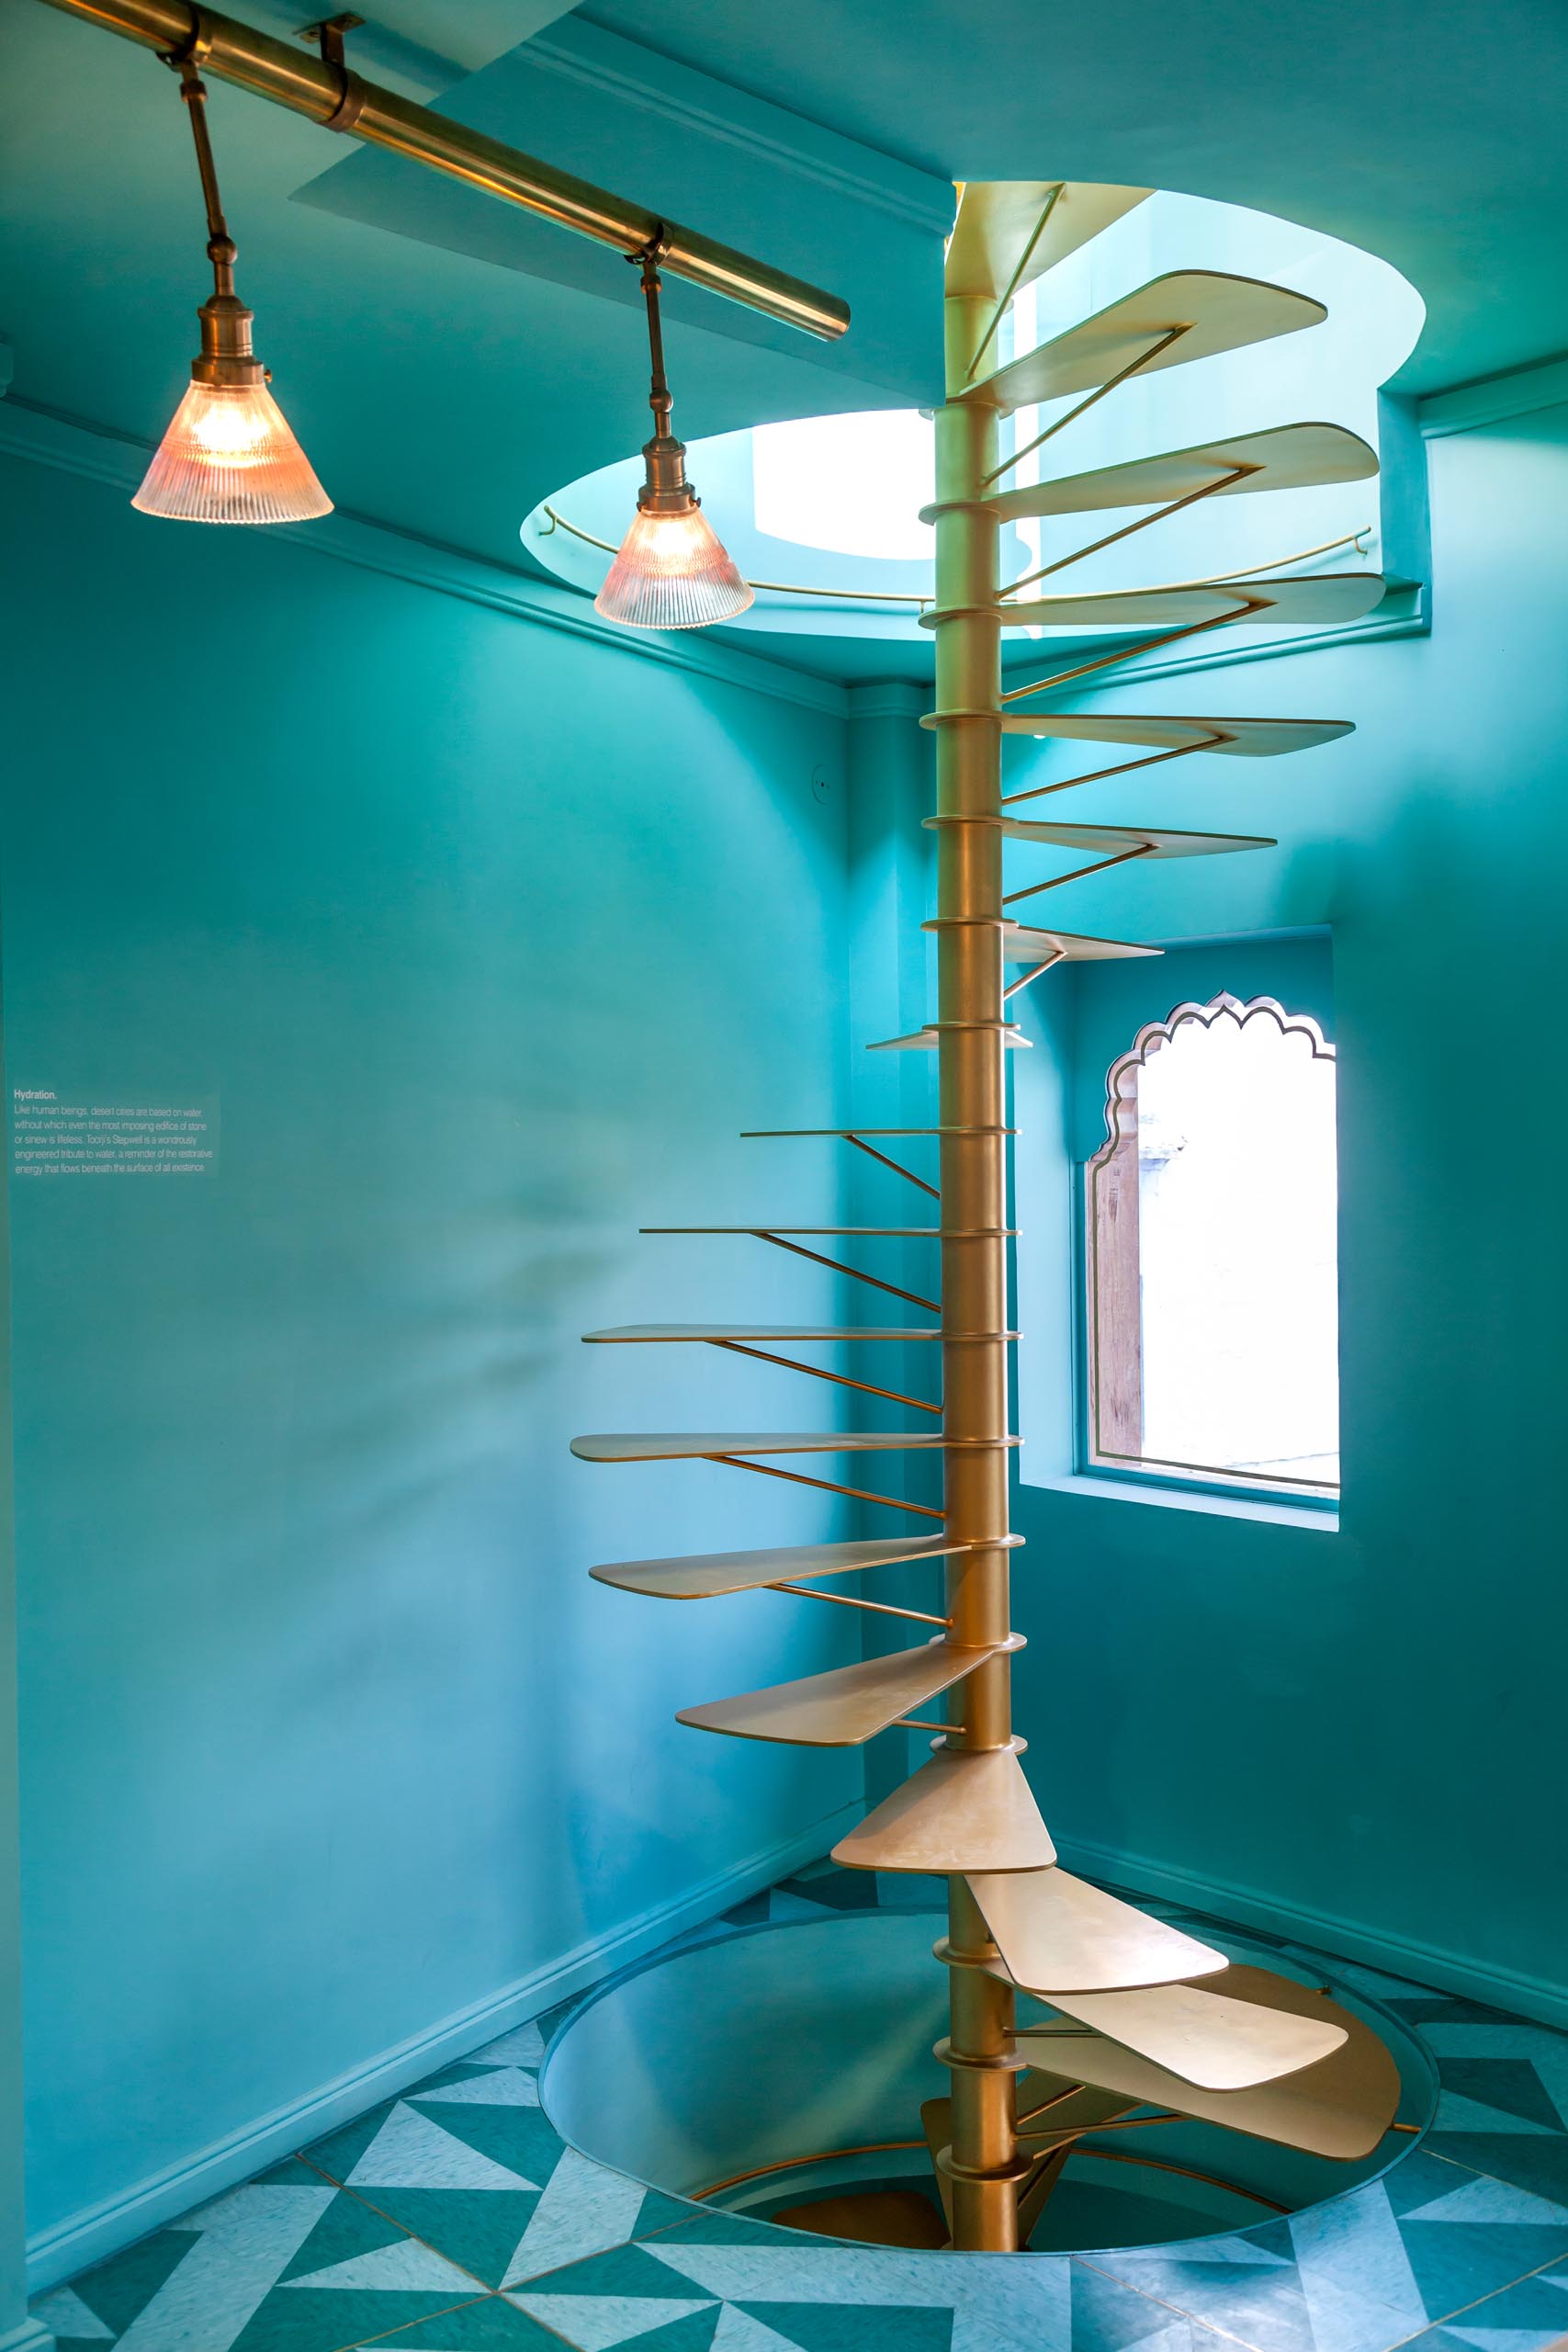 Teal blue/green walls surround a gold colored spiral staircase.